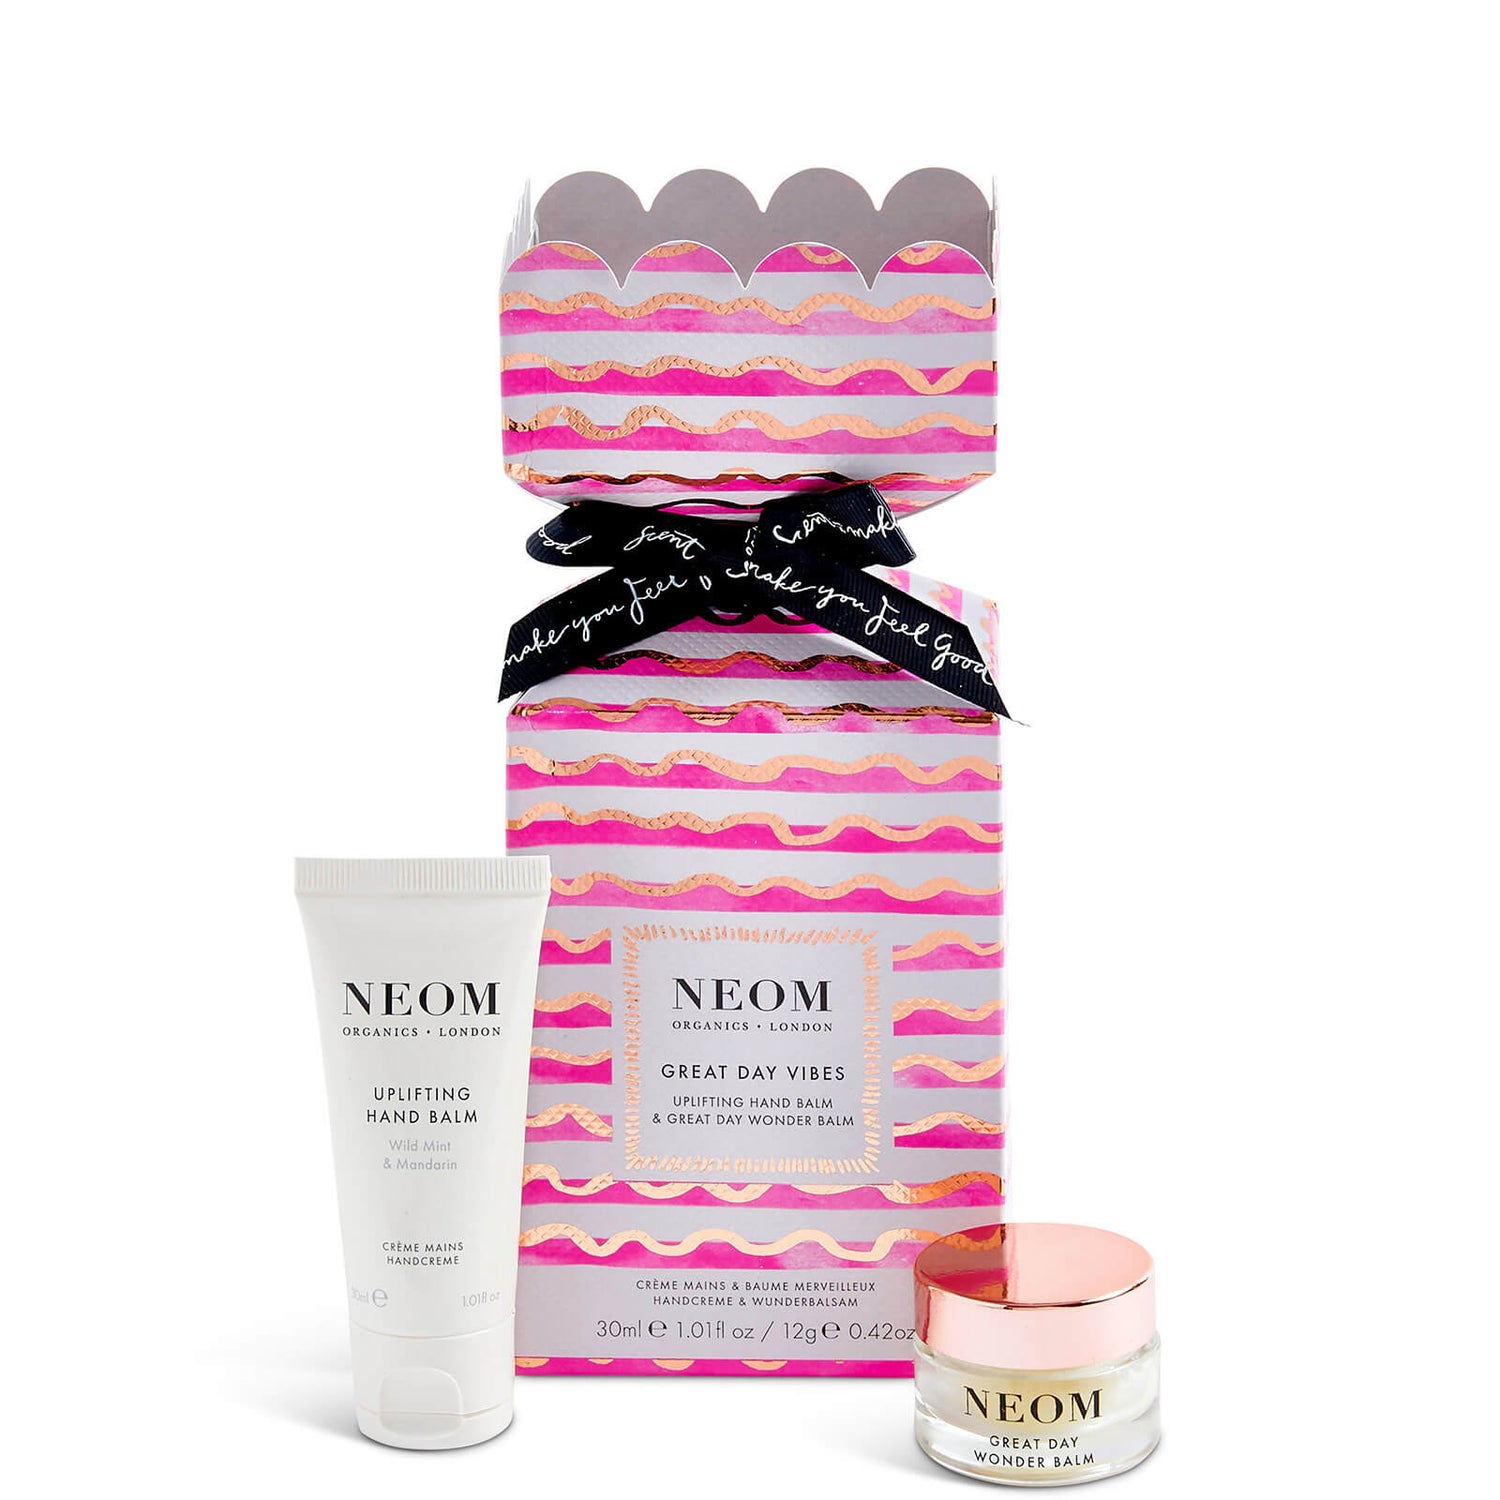 NEOM Great Day Vibes (Worth £24.00)